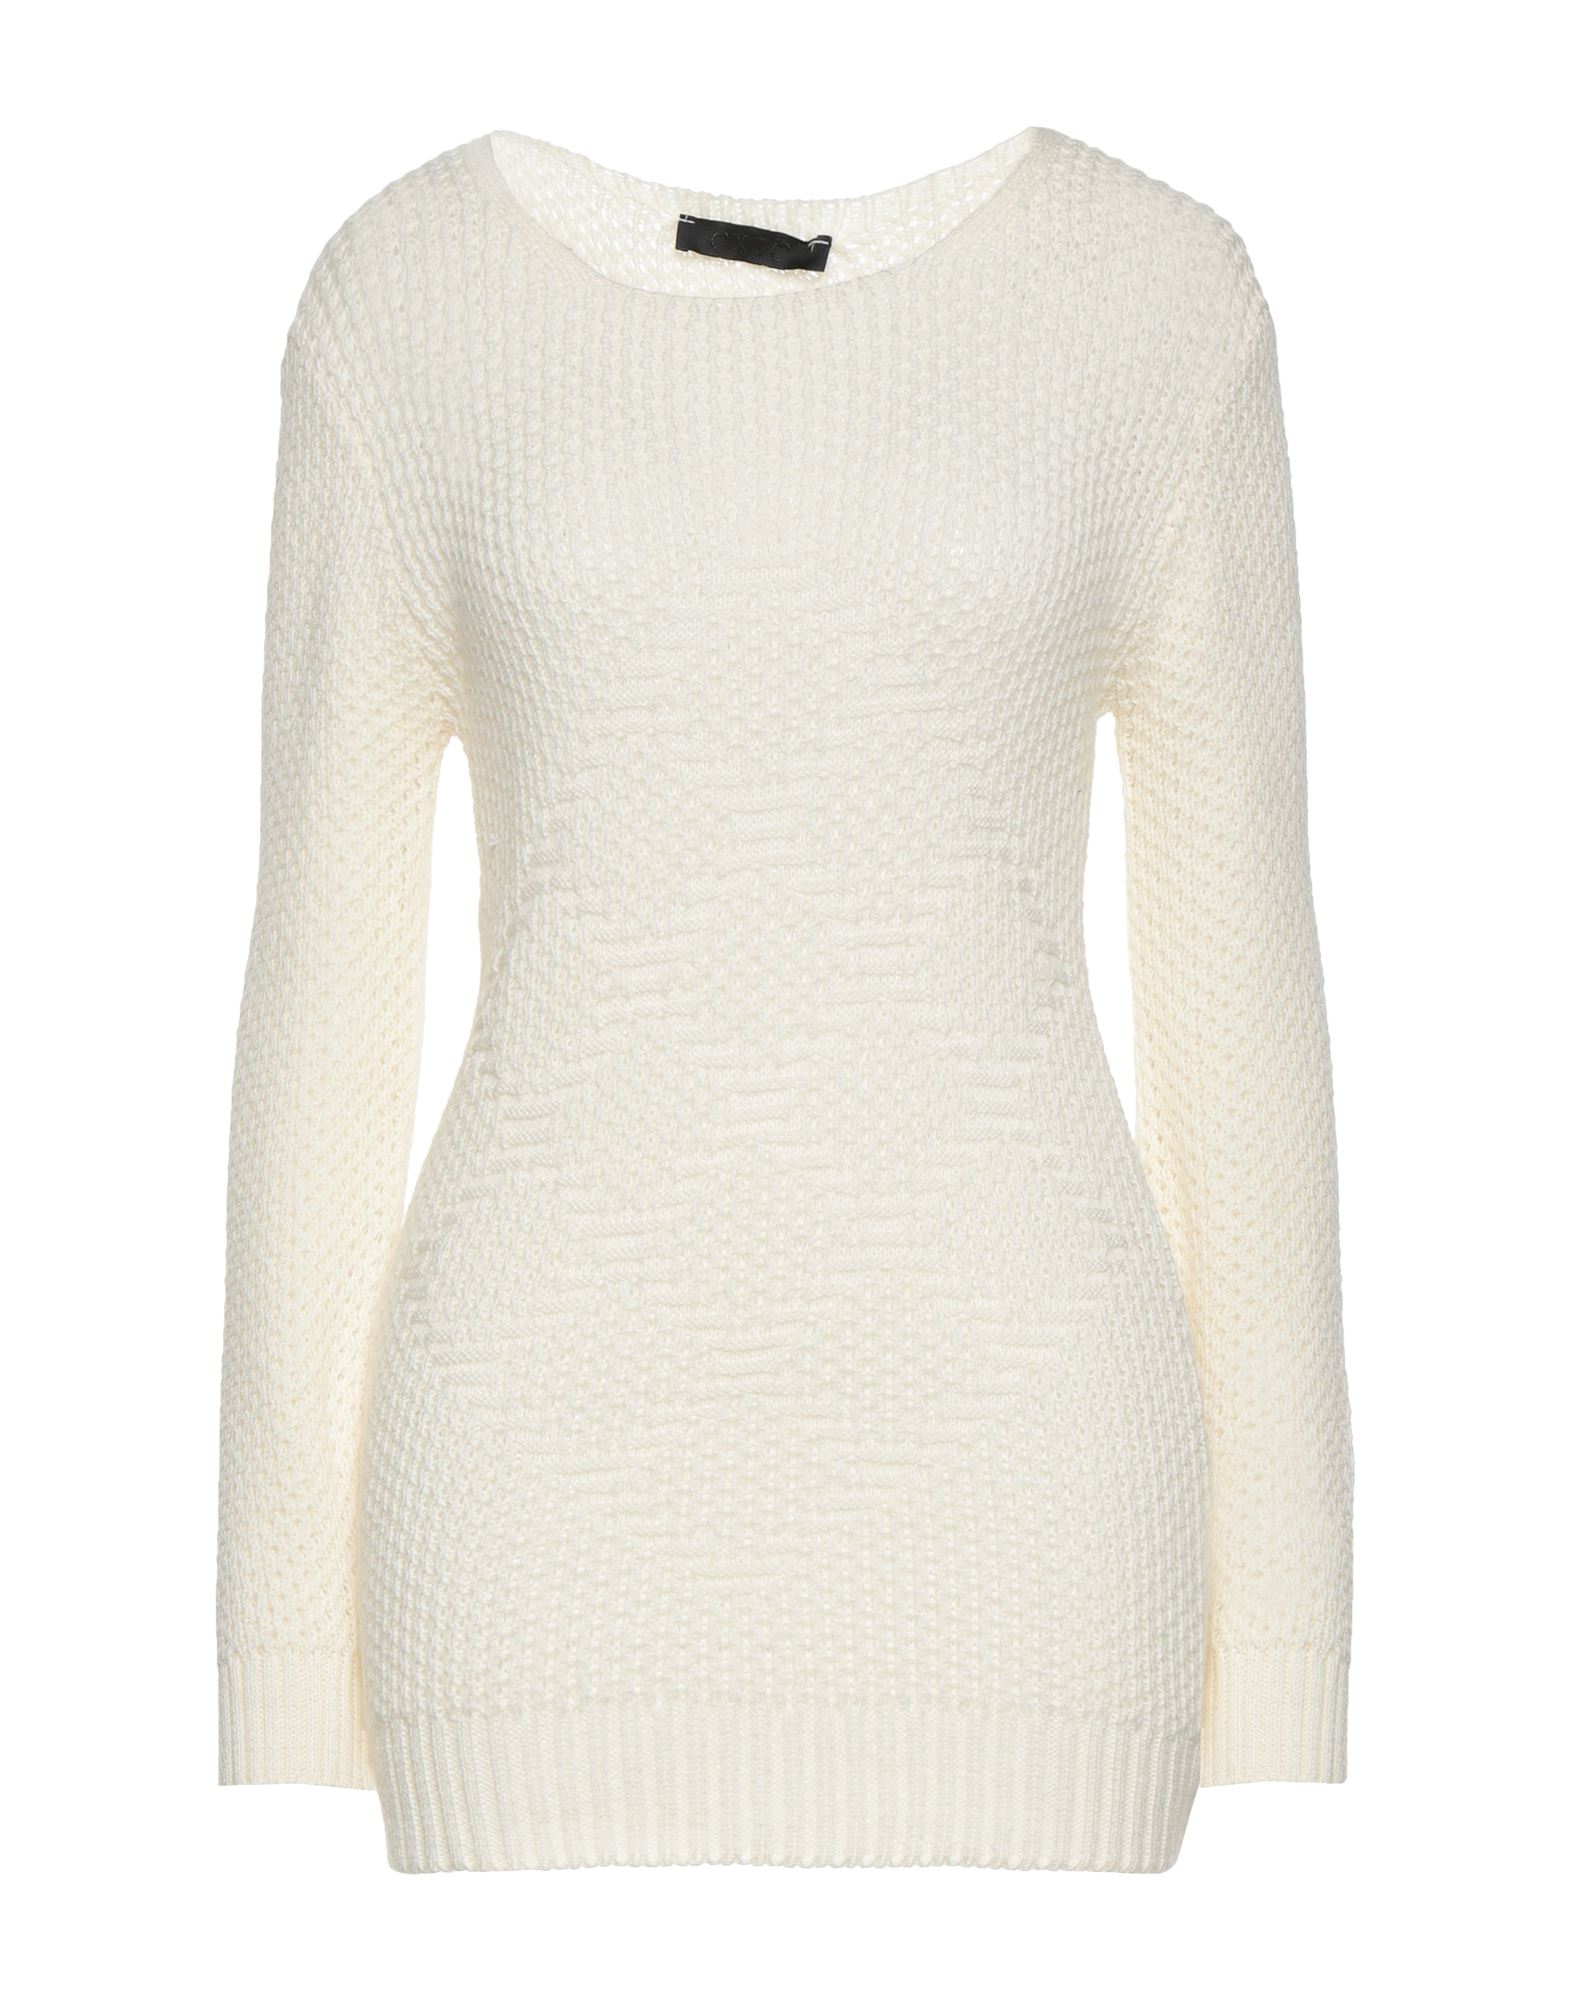 Exte Woman Sweater Ivory Size L/xl Acrylic, Wool In White